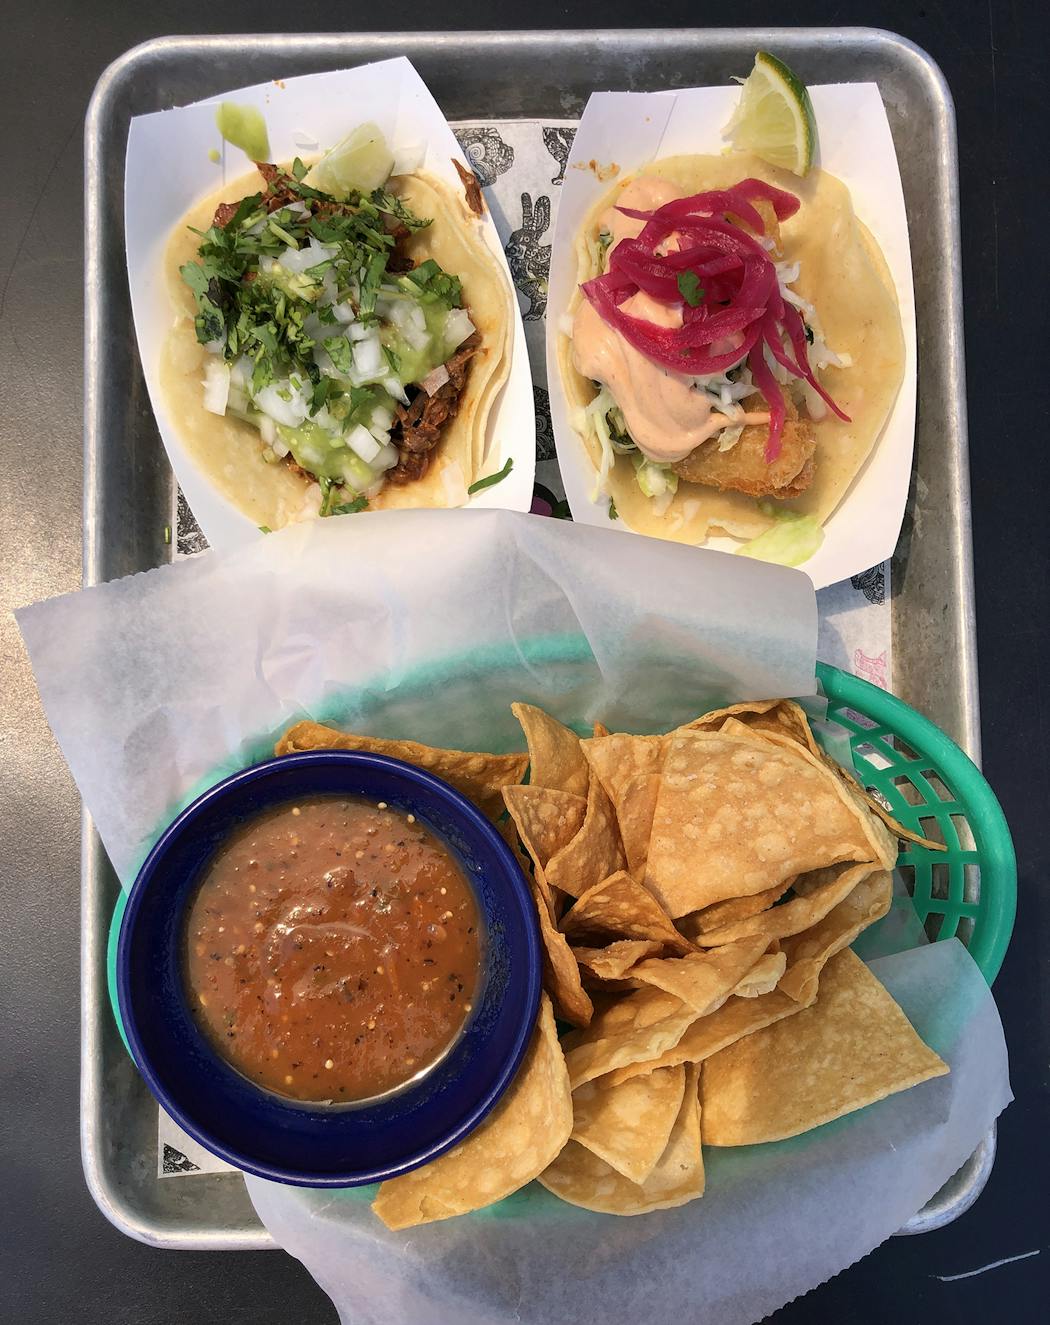 The taco lunch special at Centro.